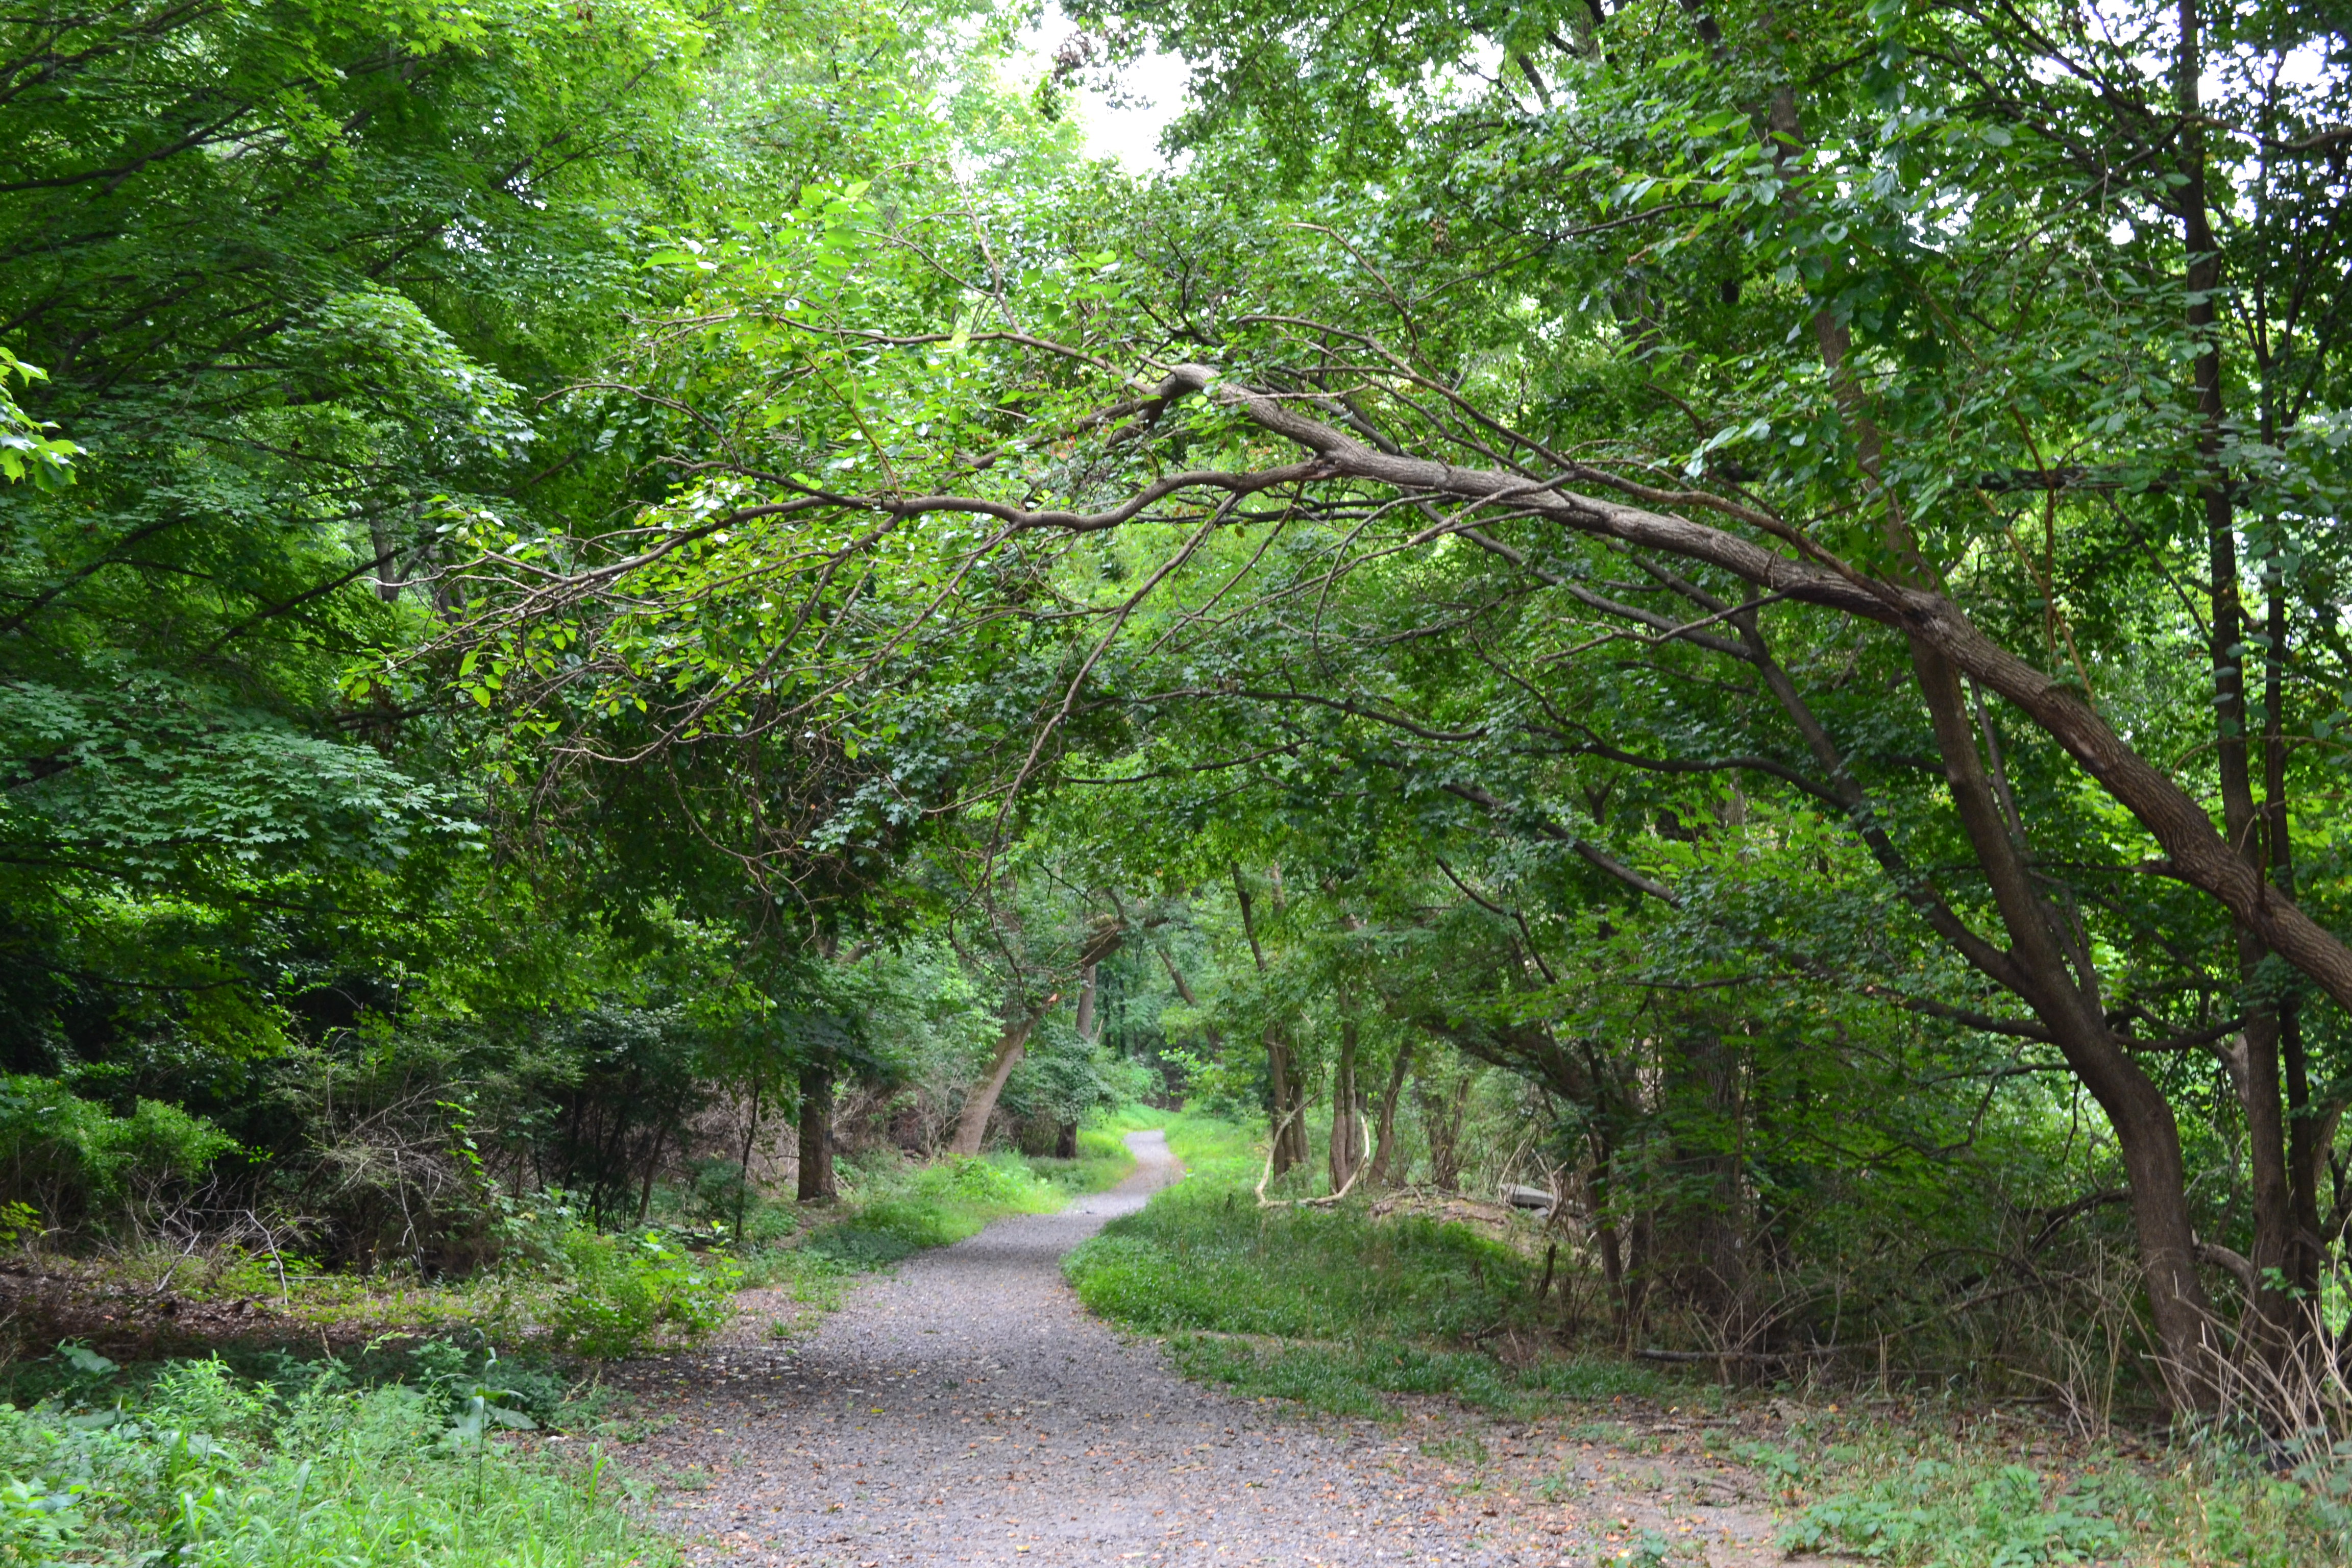 There are about two miles of unpaved trails in Cobbs Creek